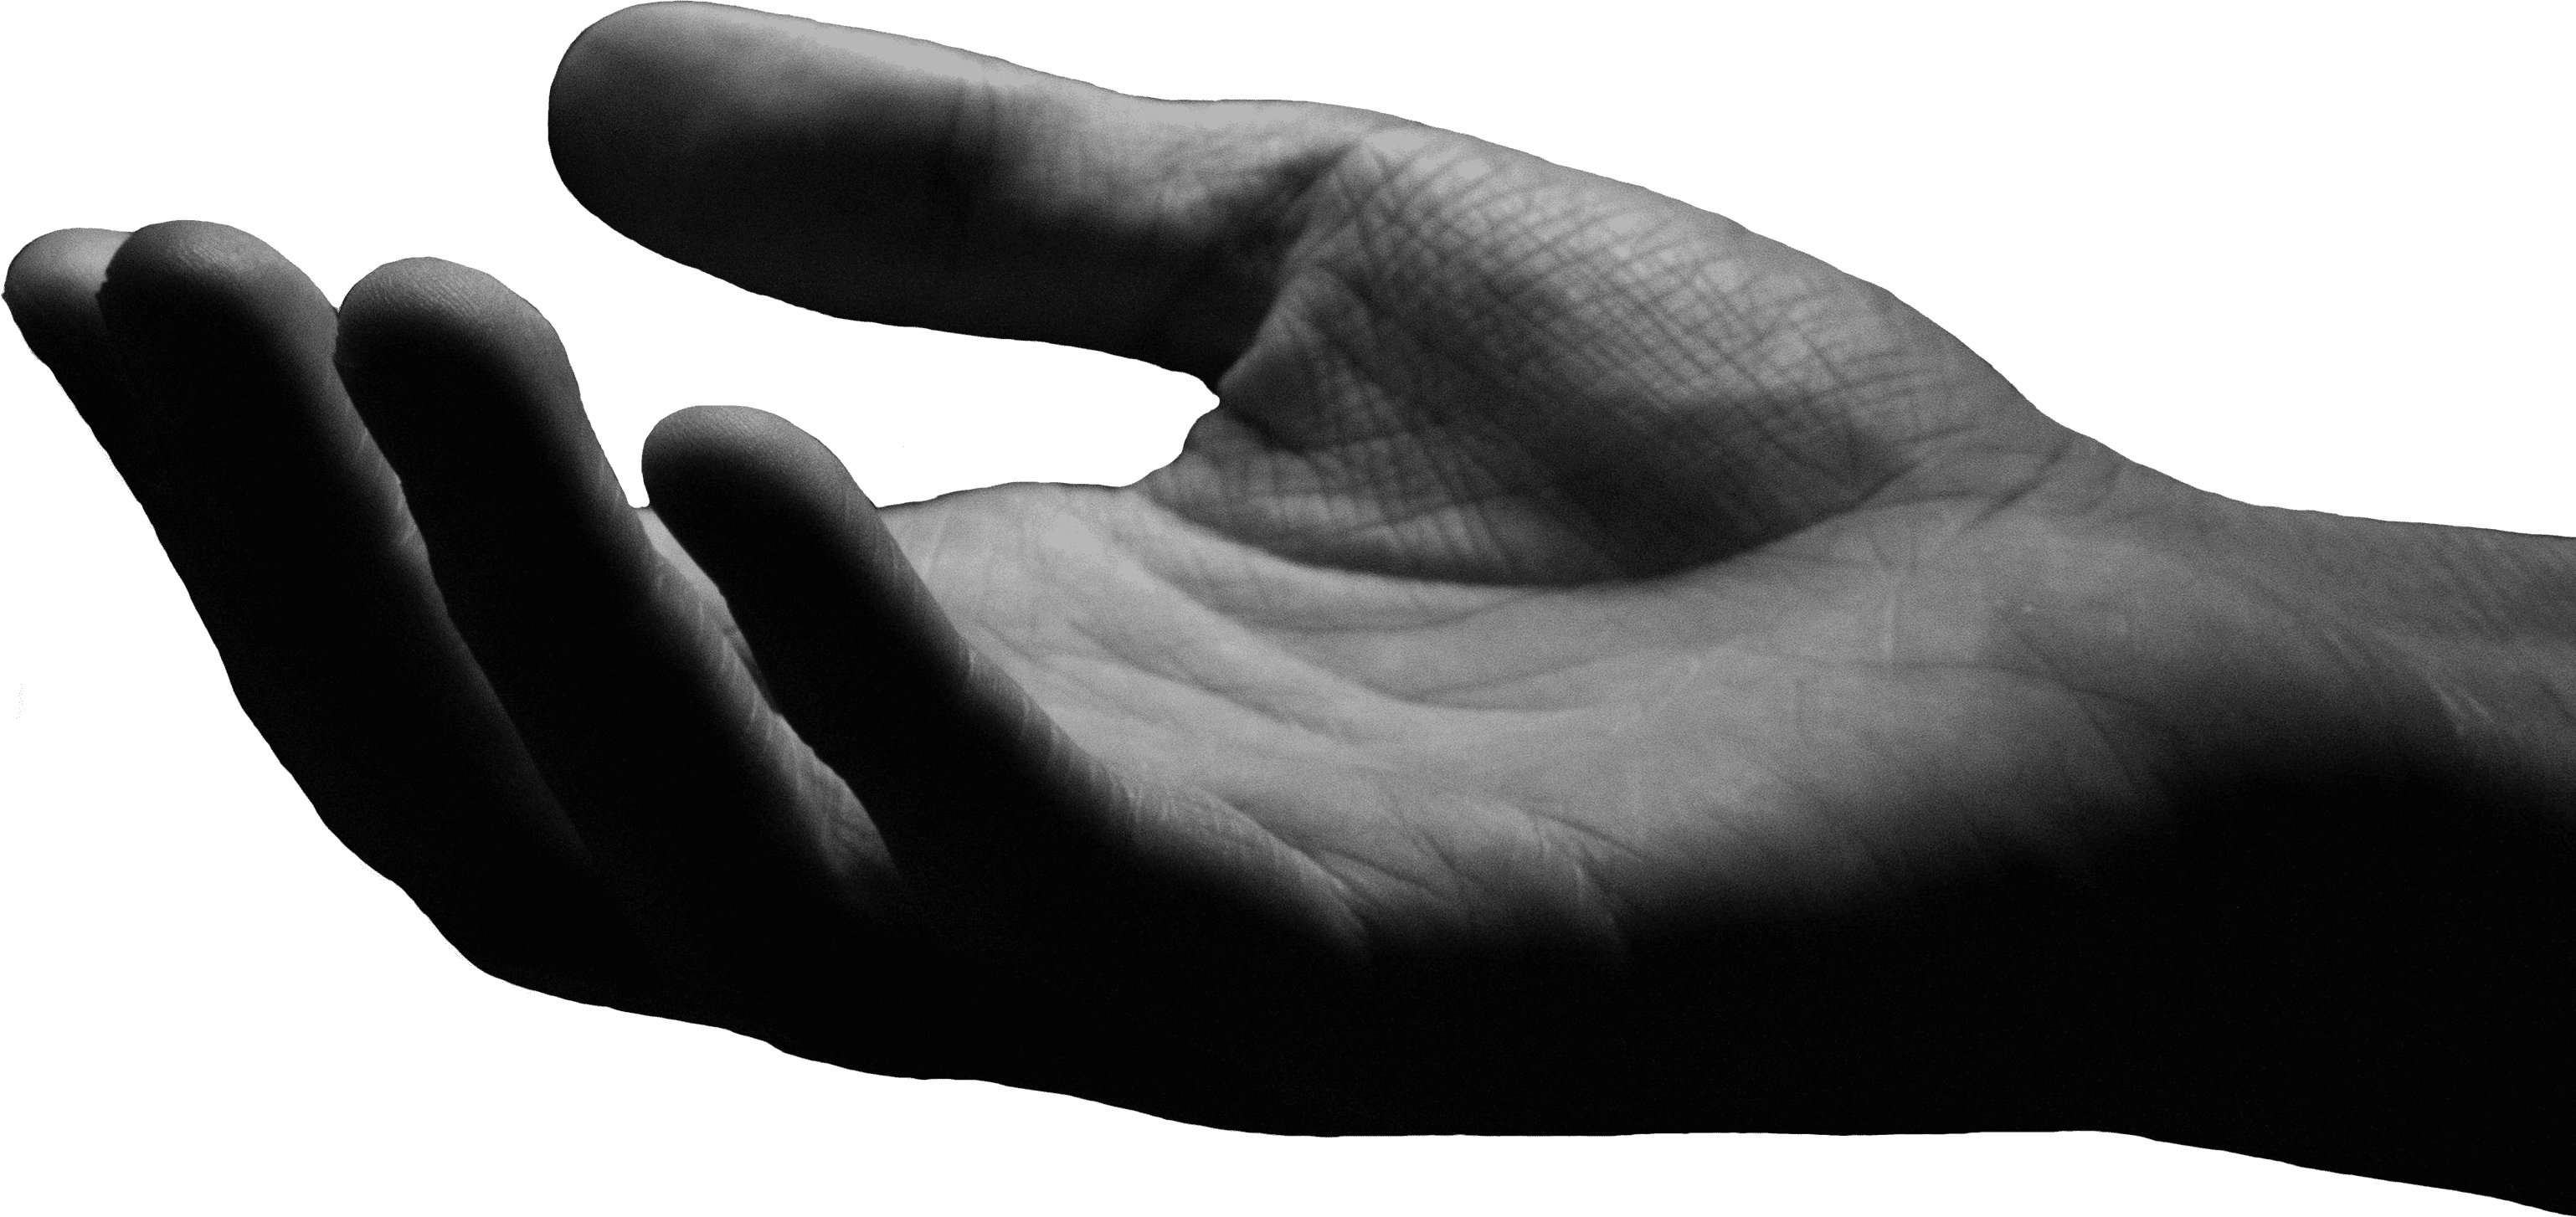 Realistic hand in black and white holding a minimalist image of our services